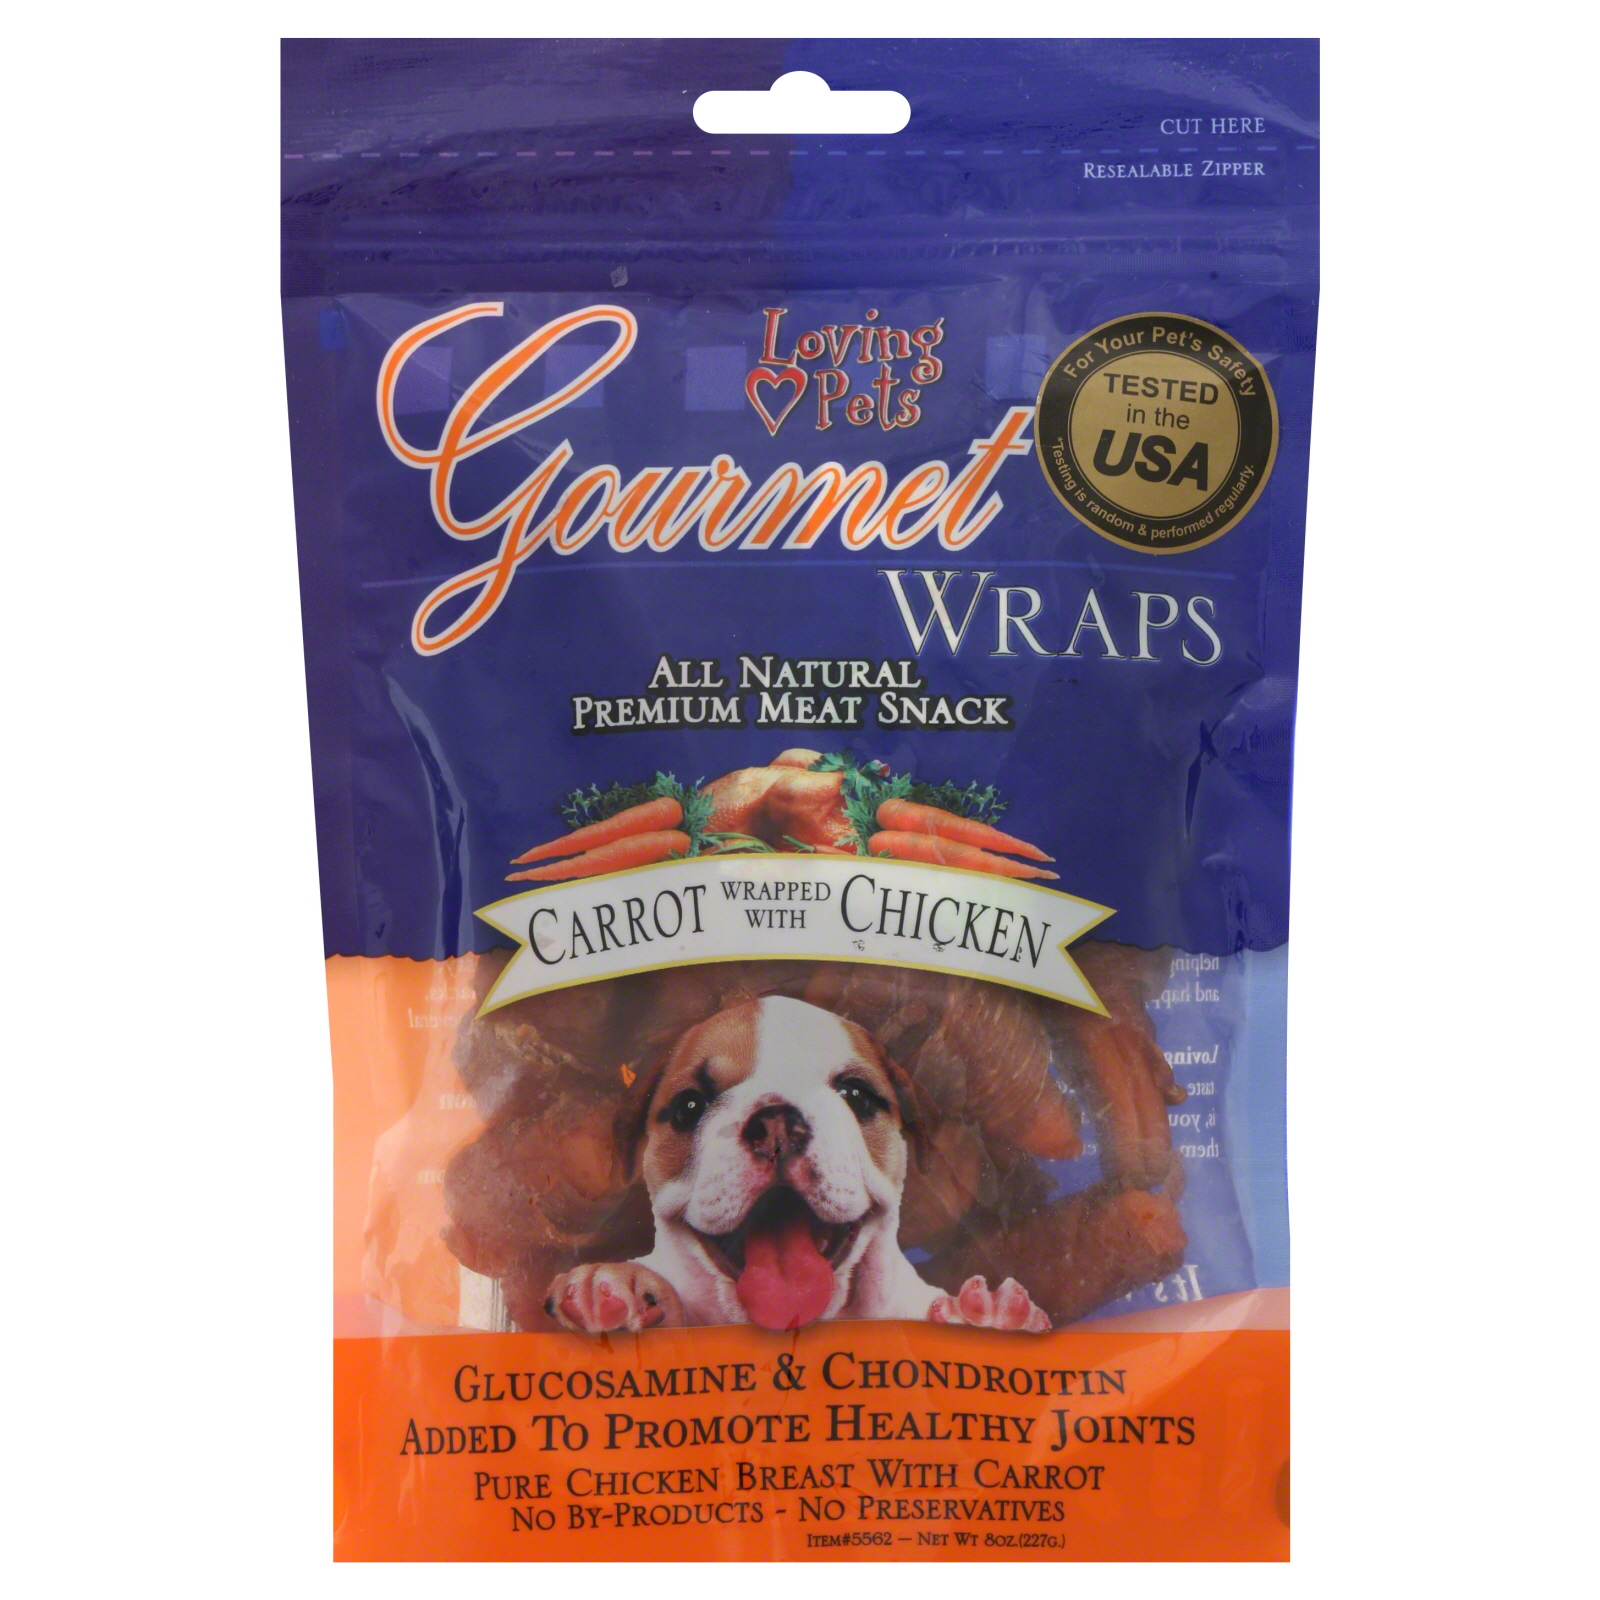 Loving Pets Gourmet All Natural Premium Meat Snack, Wraps, Carrot Wrapped with Chicken, 8 oz (227 g)